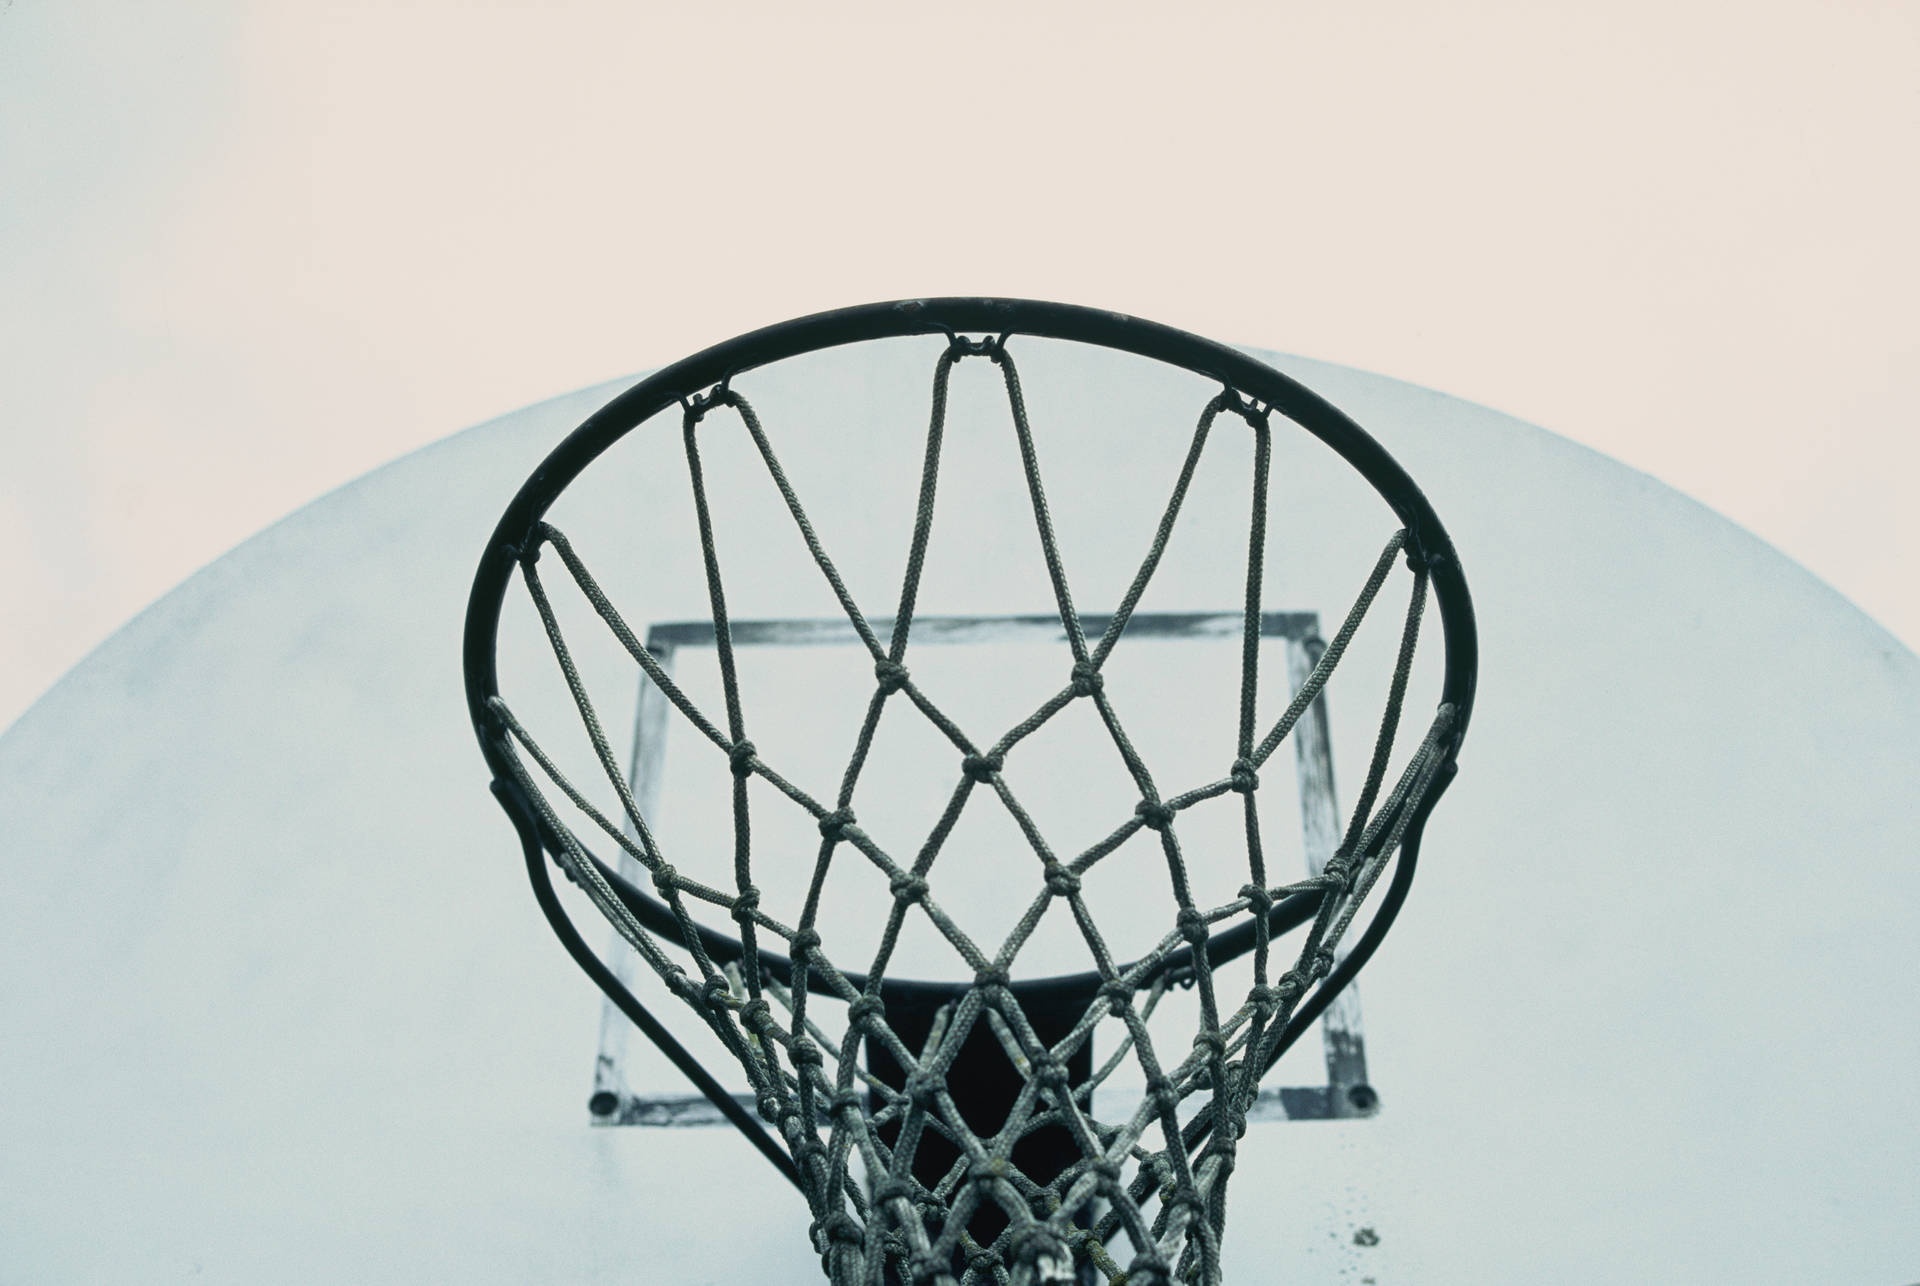 Basketball 5444X3647 Wallpaper and Background Image